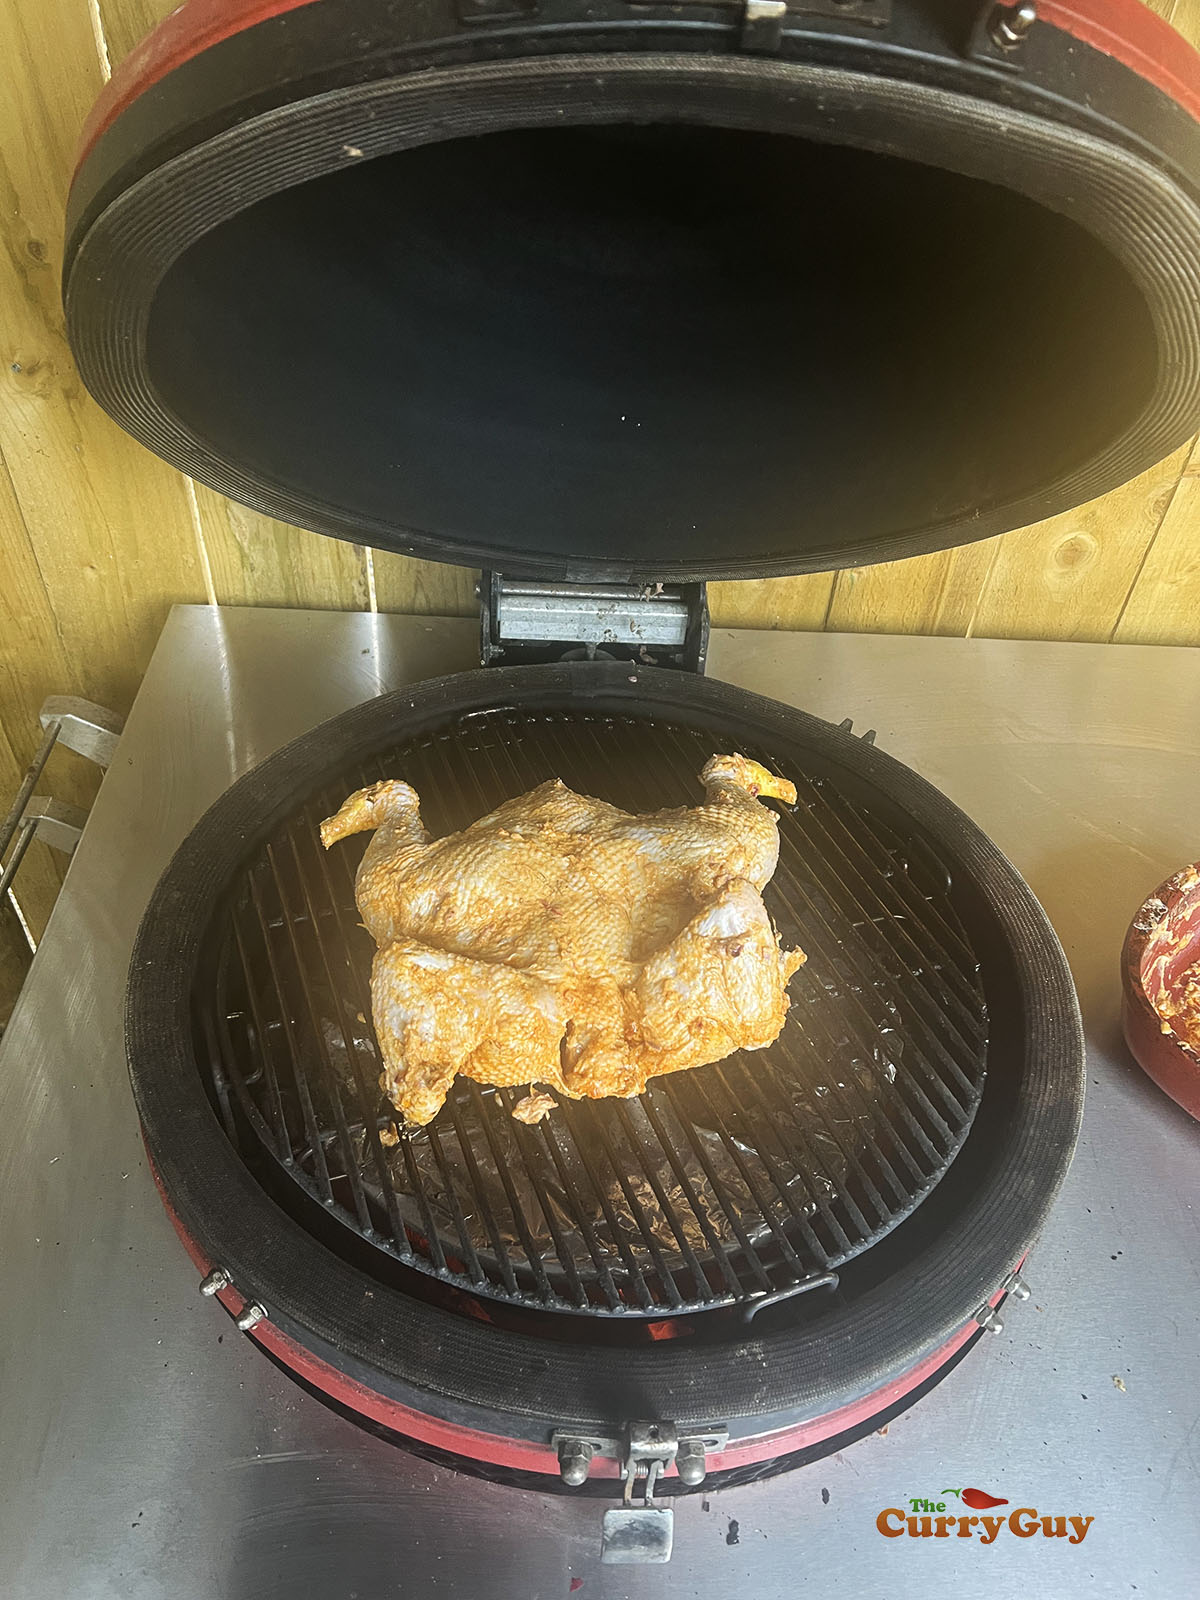 Placing the chicken on the barbecue.